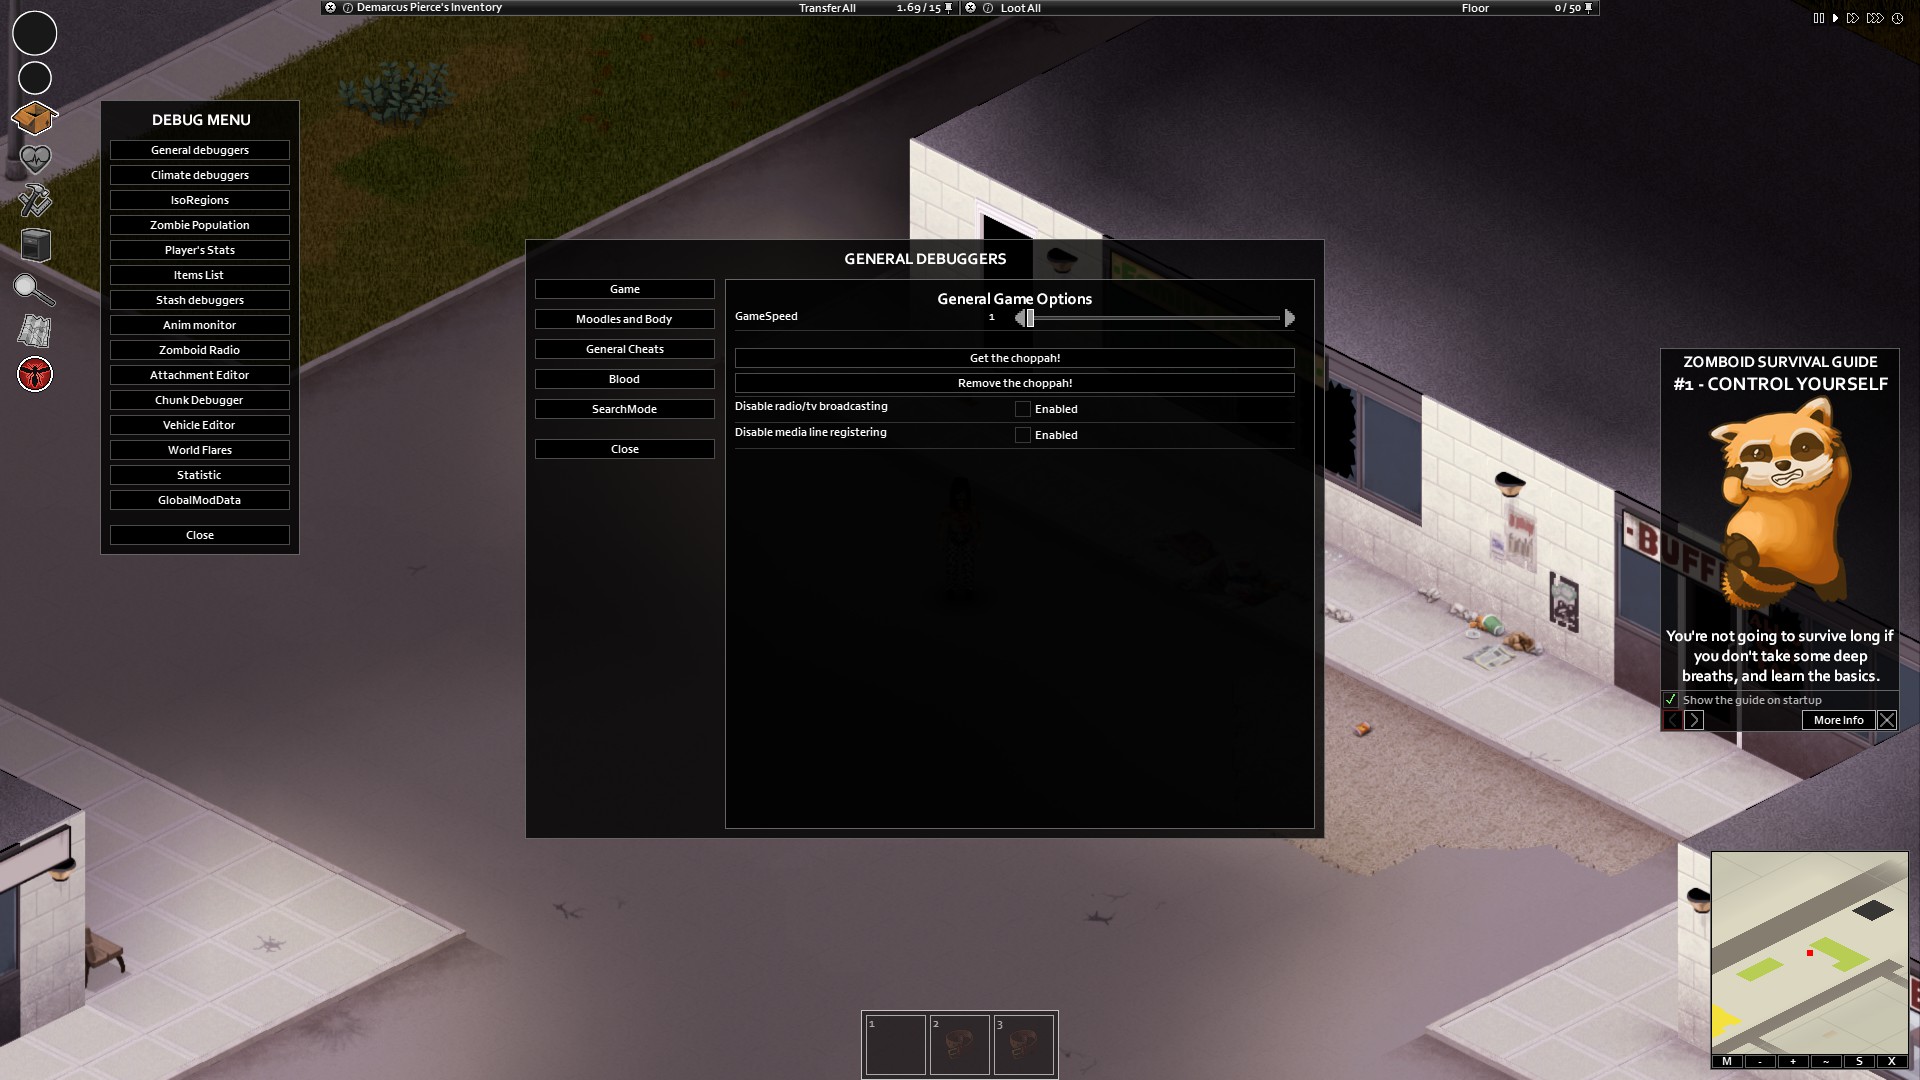 Log in as an Admin in Project Zomboid